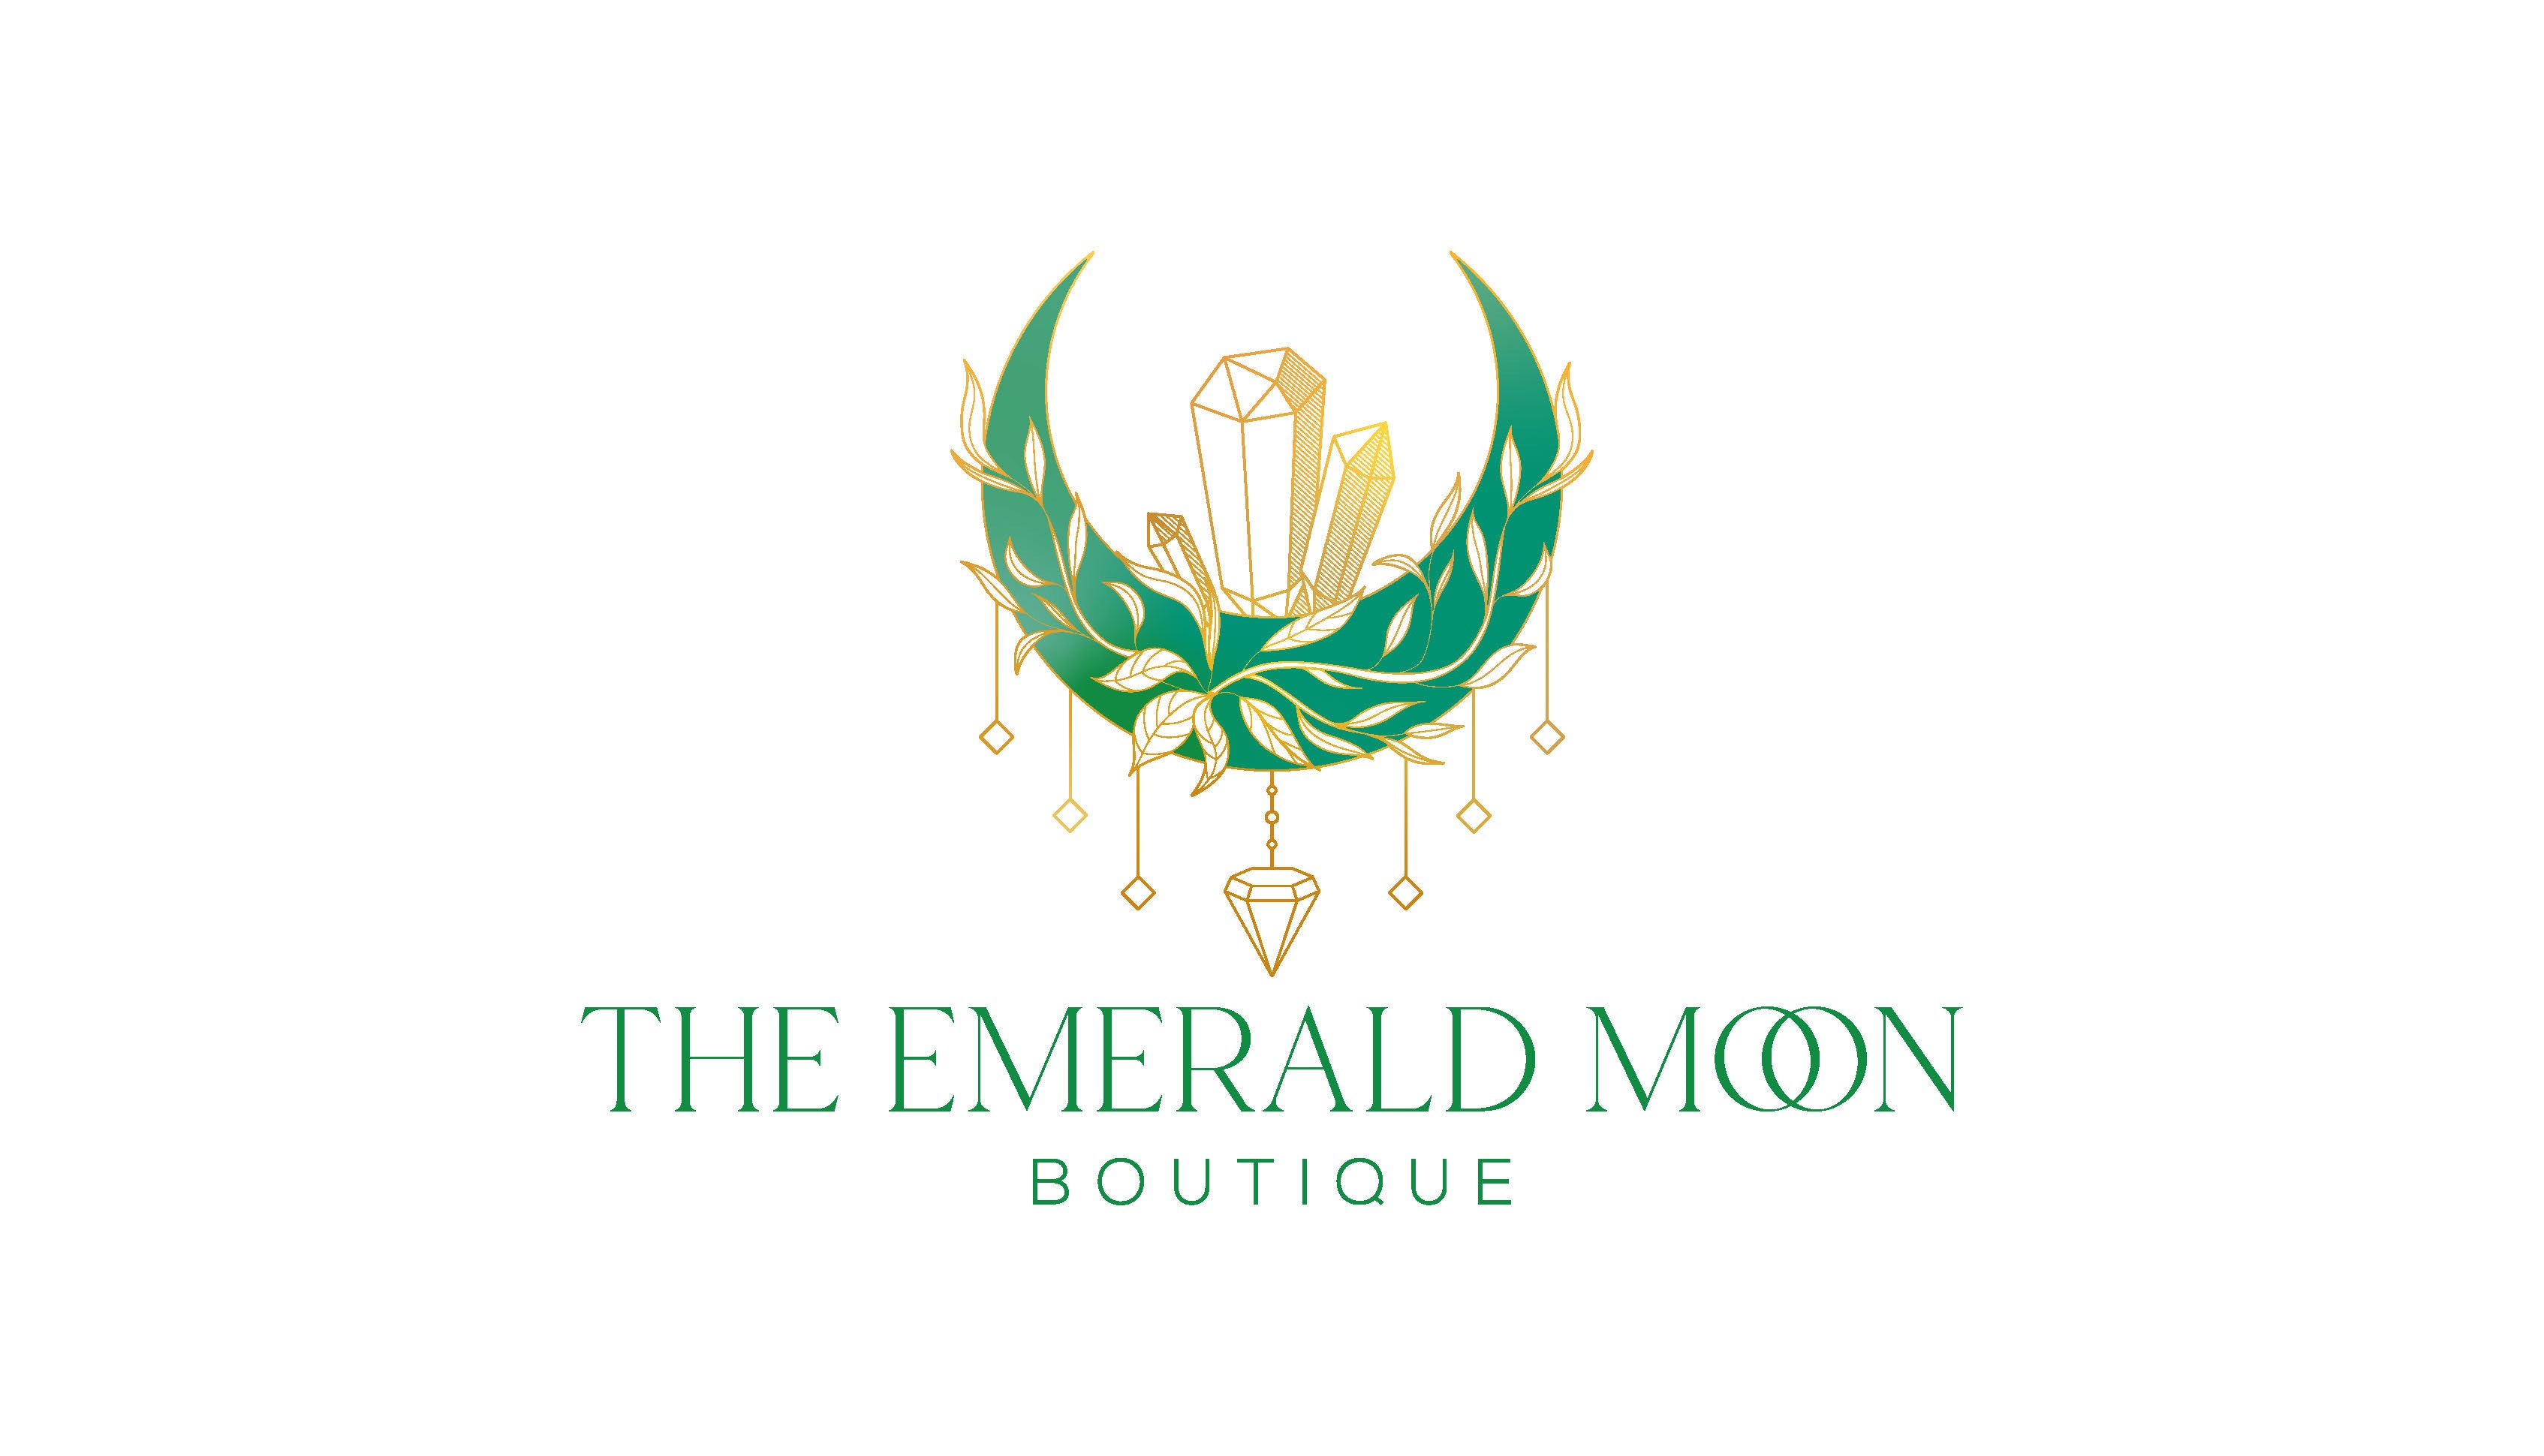 The Emerald Moon Boutique